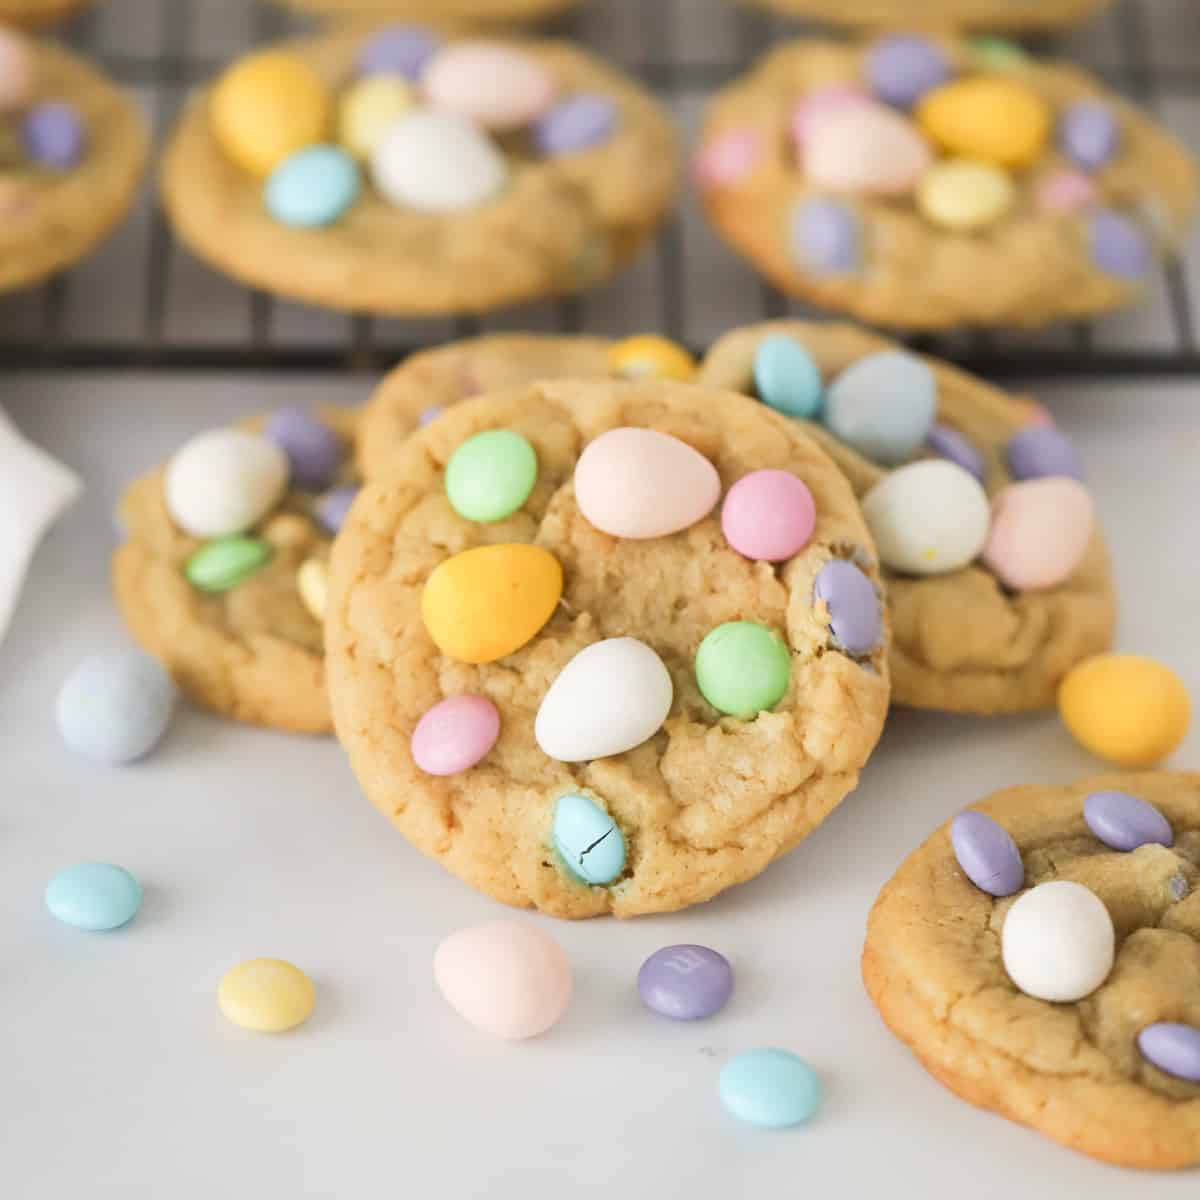 easy cadbury cookies with m and m's and cadbury eggs, mini egg easter eggs cookies, easter egg cookies.